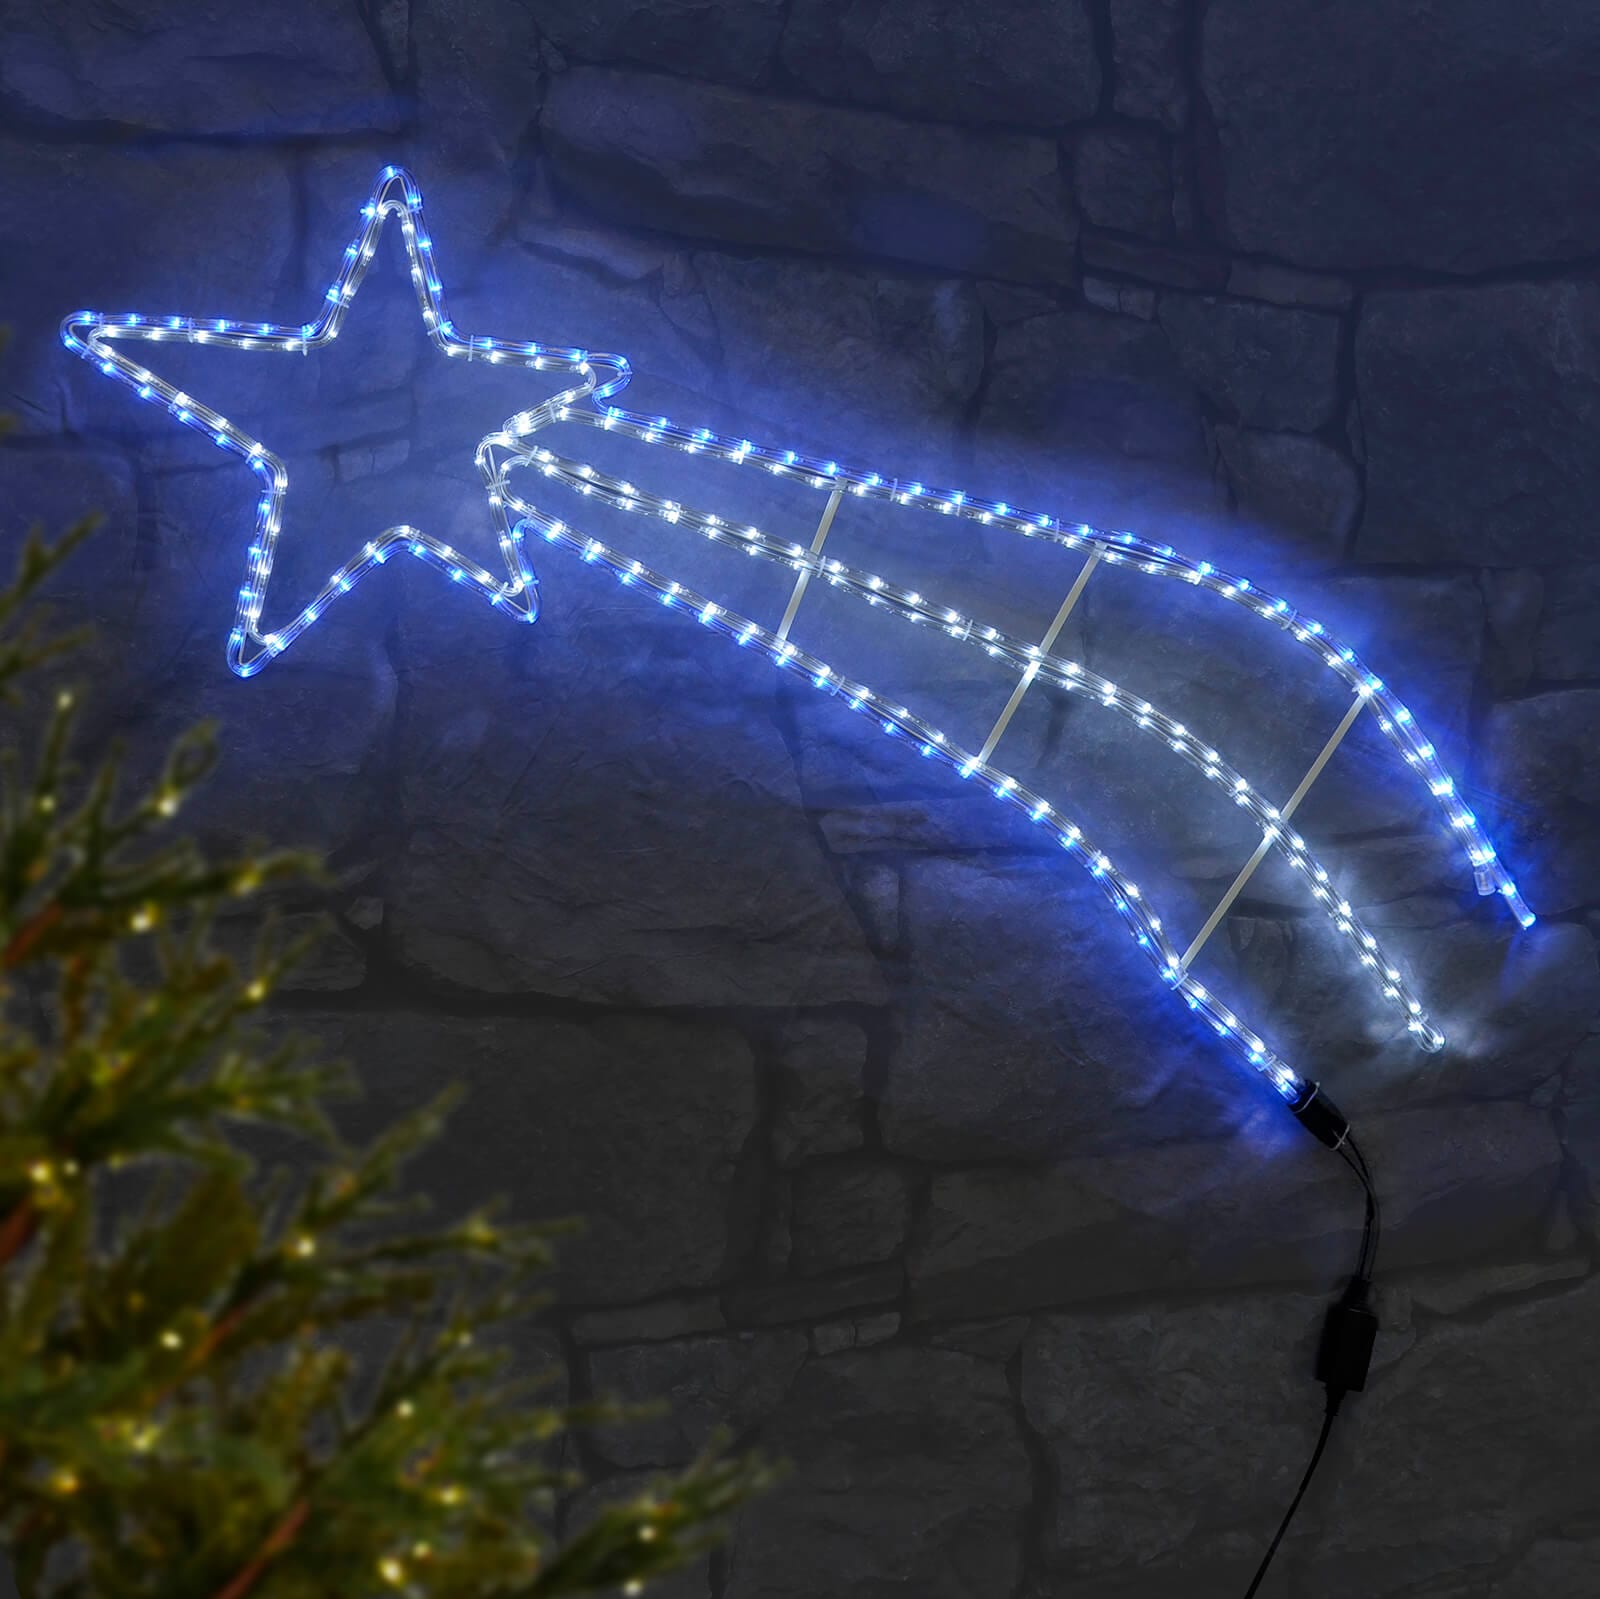 Blue and white shooting star rope light Christmas garden decoration on a stone wall with Christmas tree